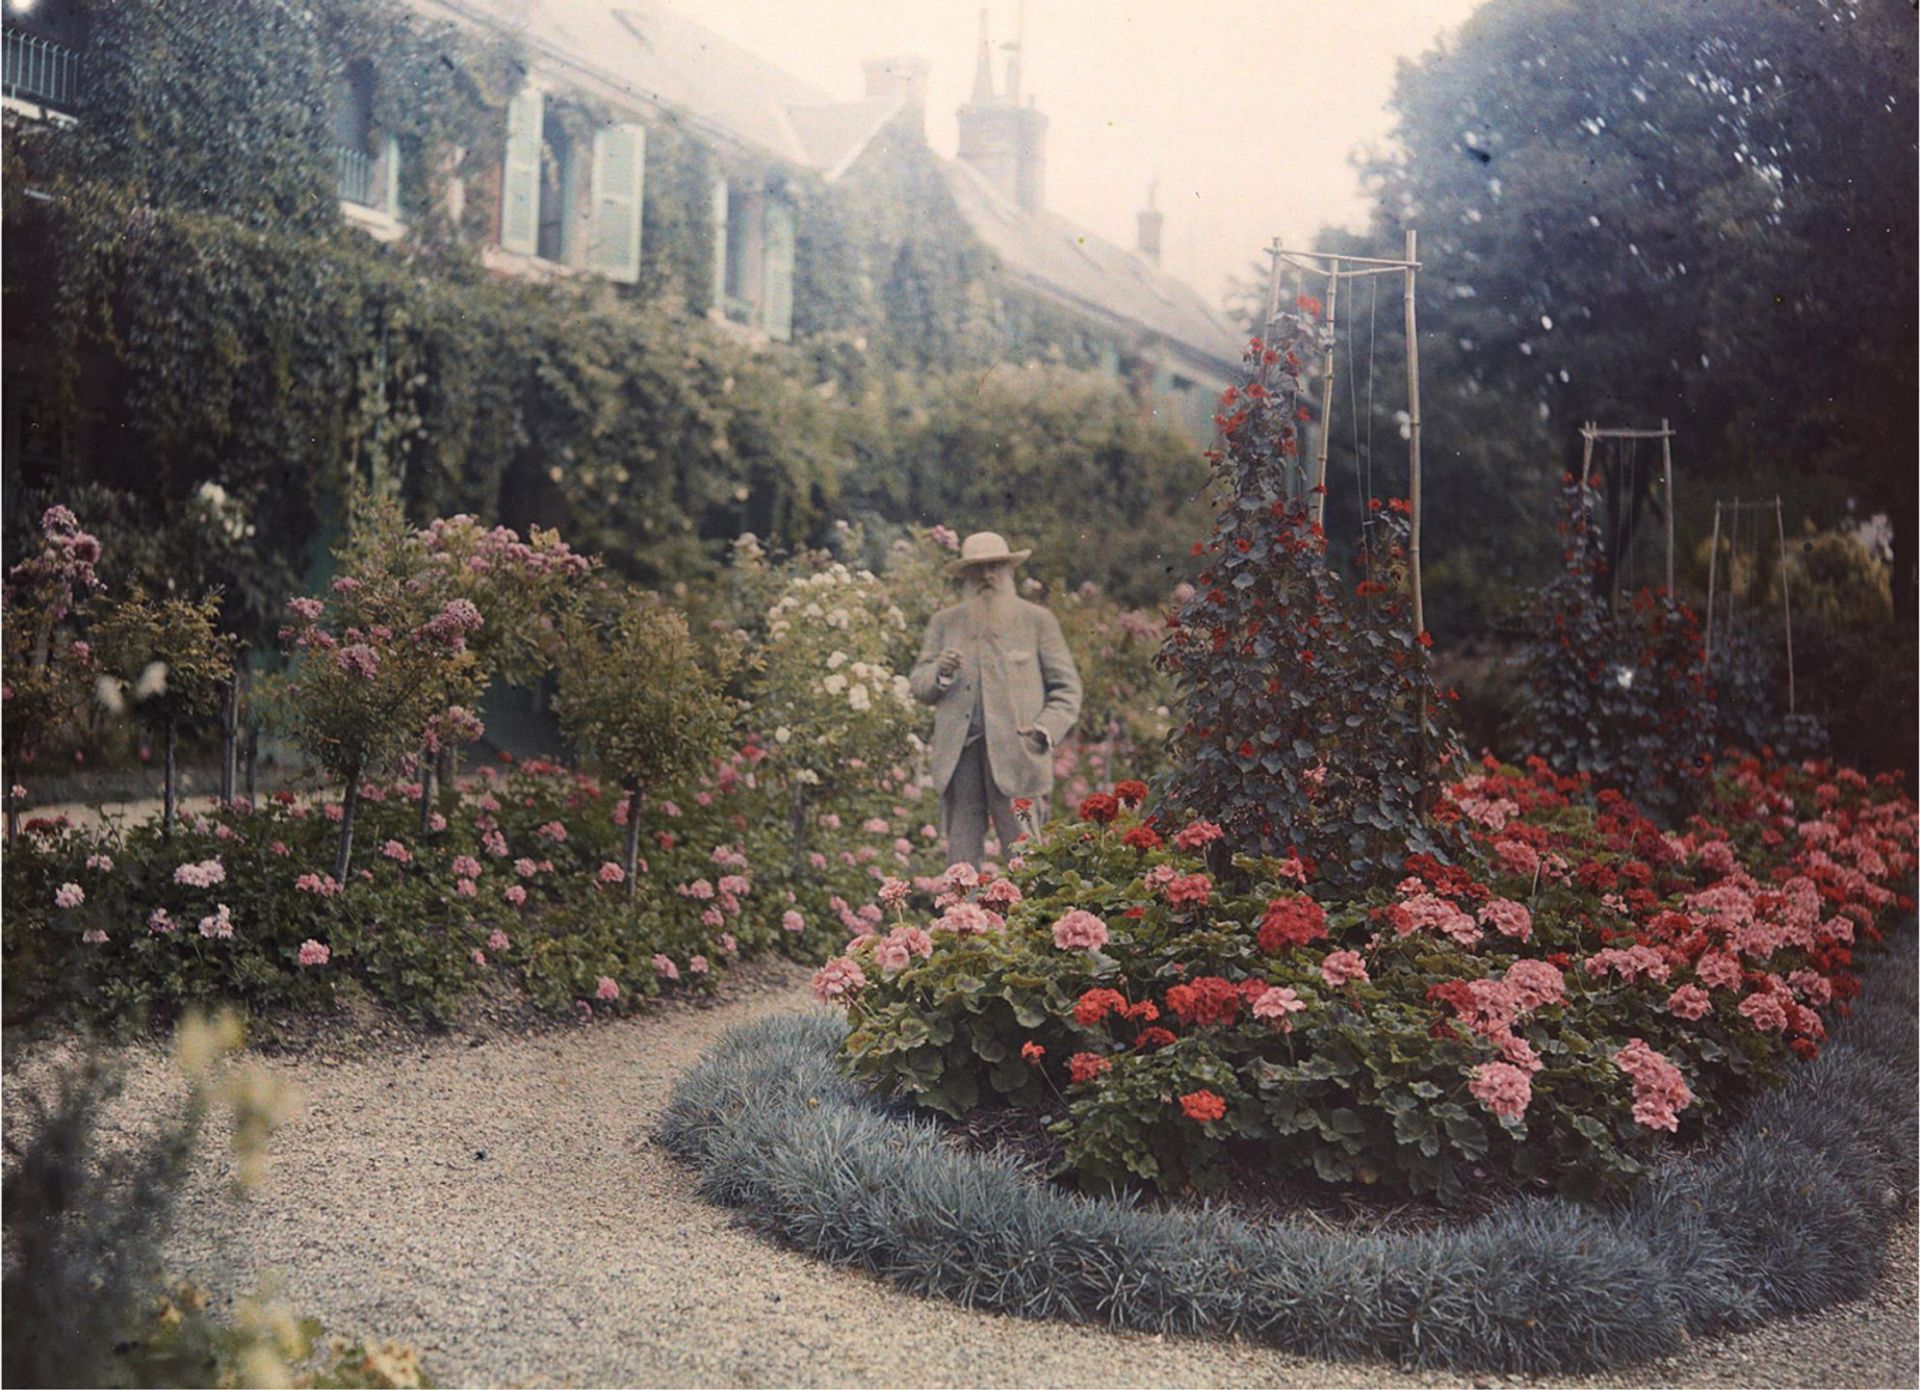 A 1921 photograph of Claude Monet in his garden at Giverny, where he painted some of his most famous works © Collection Troob Family Foundation/courtesy of Fine Arts Museums, San Francisco